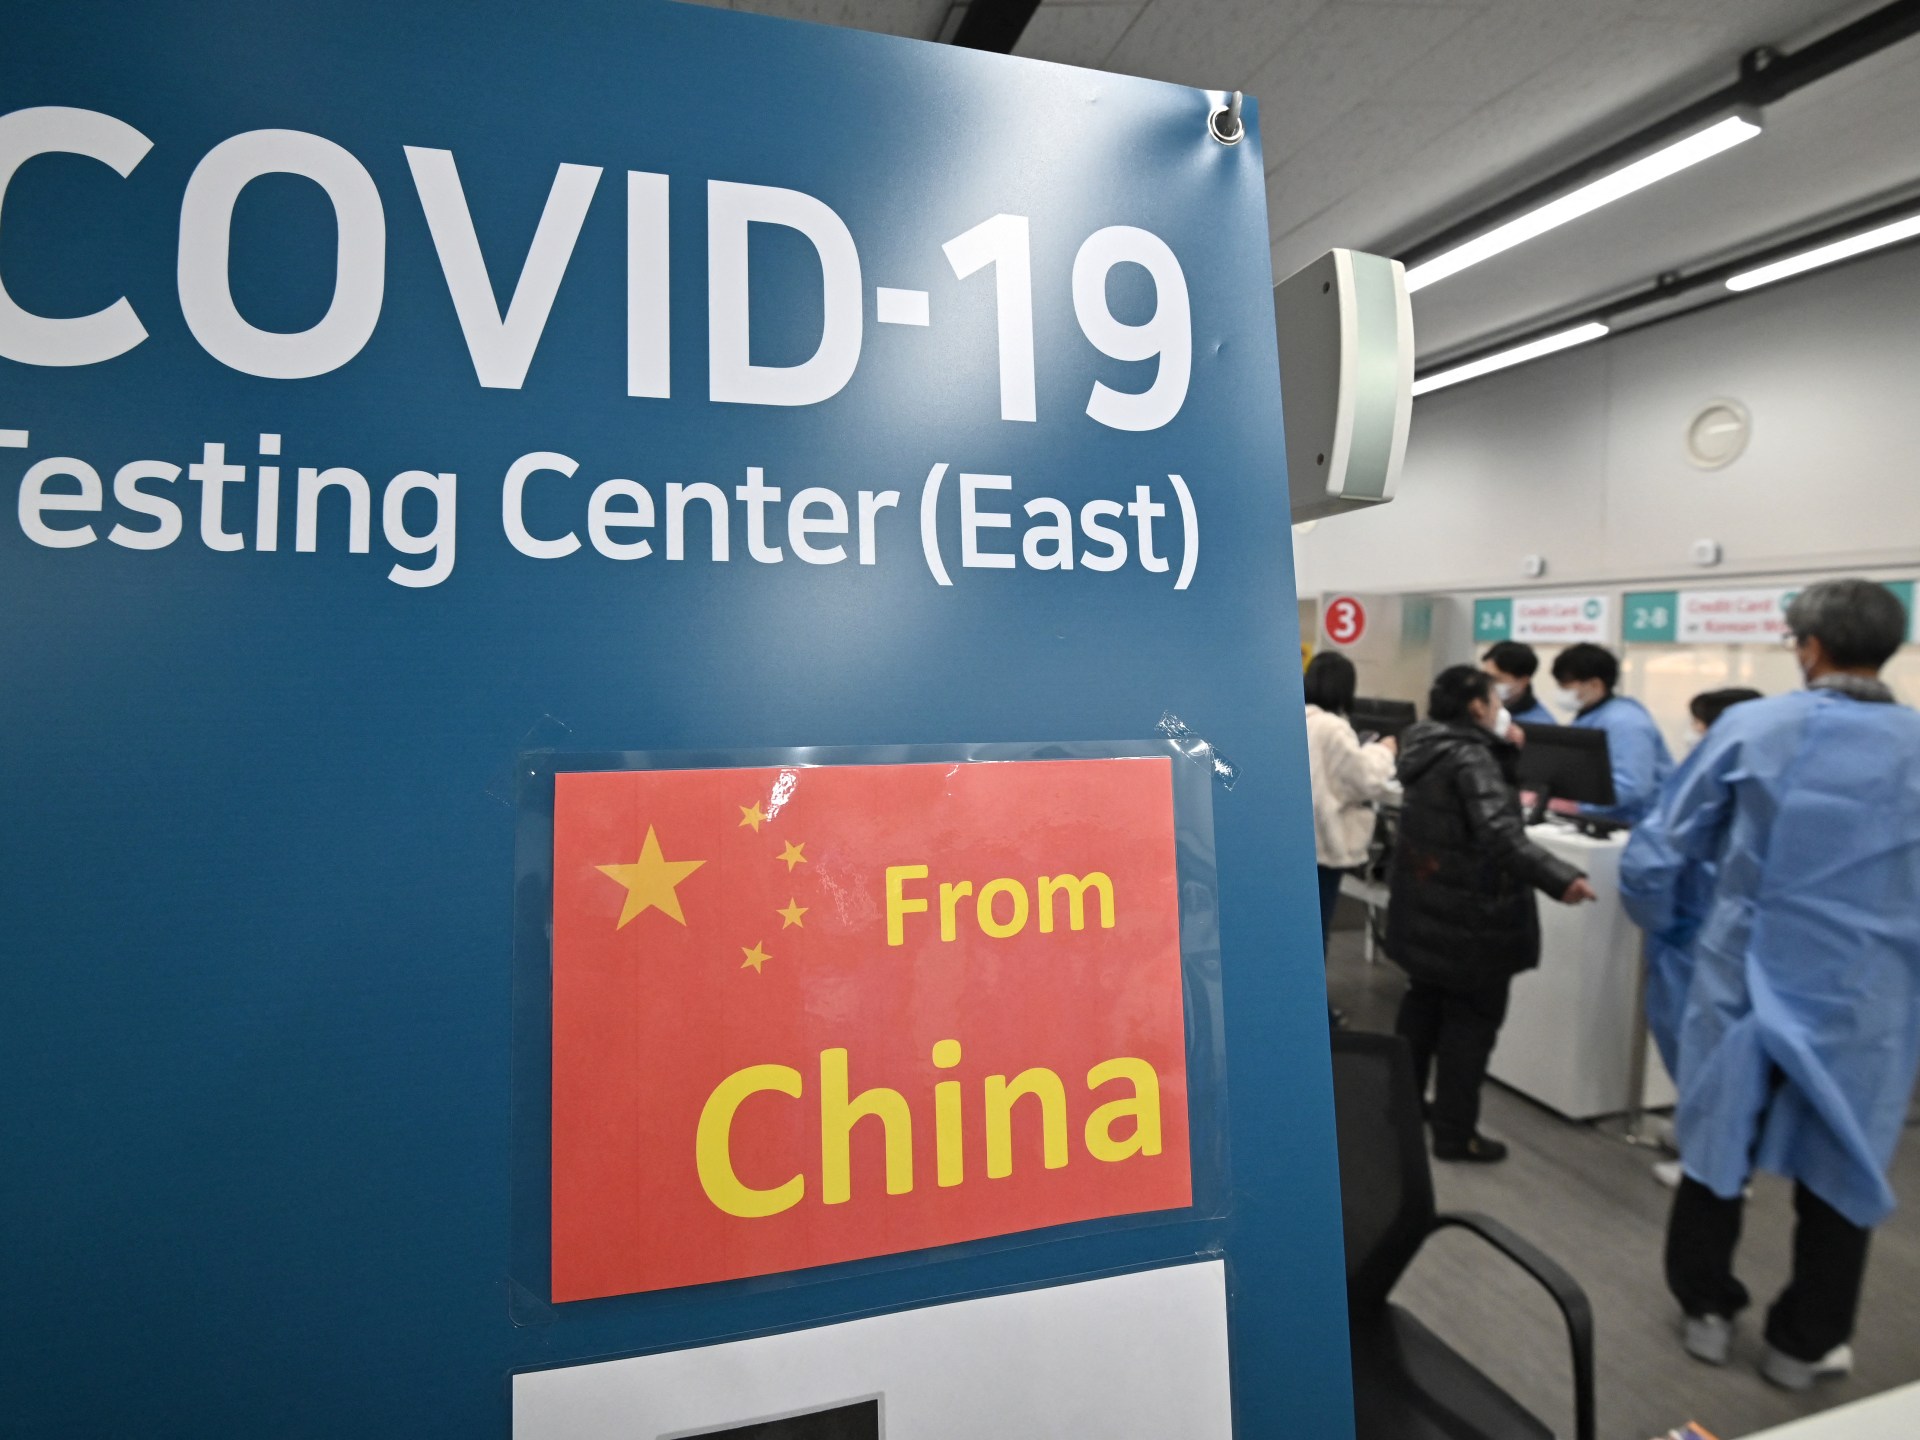 Is bias, not science, behind COVID-19 curbs on China travellers? | Coronavirus pandemic News